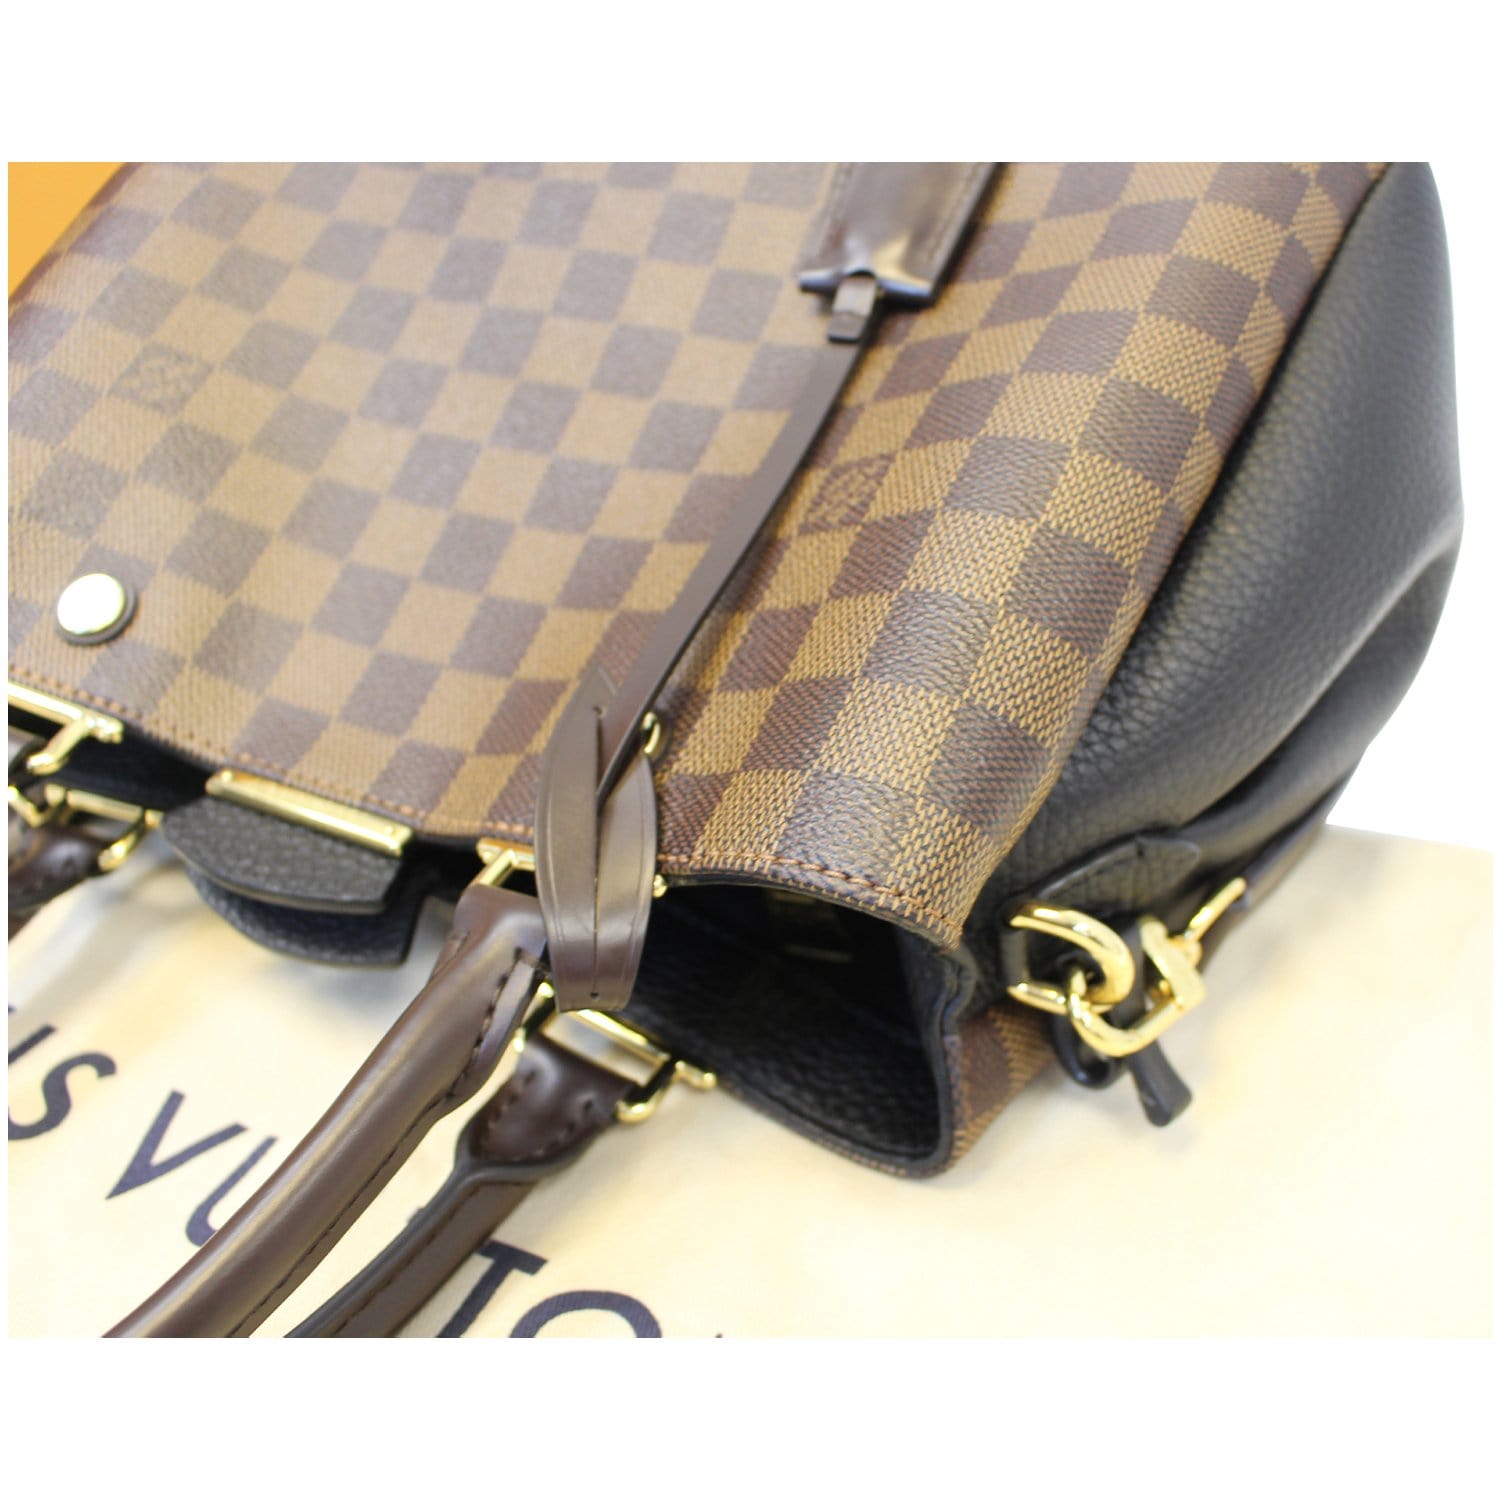 Louis Vuitton Brittany - 2 For Sale on 1stDibs  brittany louis vuitton,  brittany lv bag, louis vuitton brittany bag price